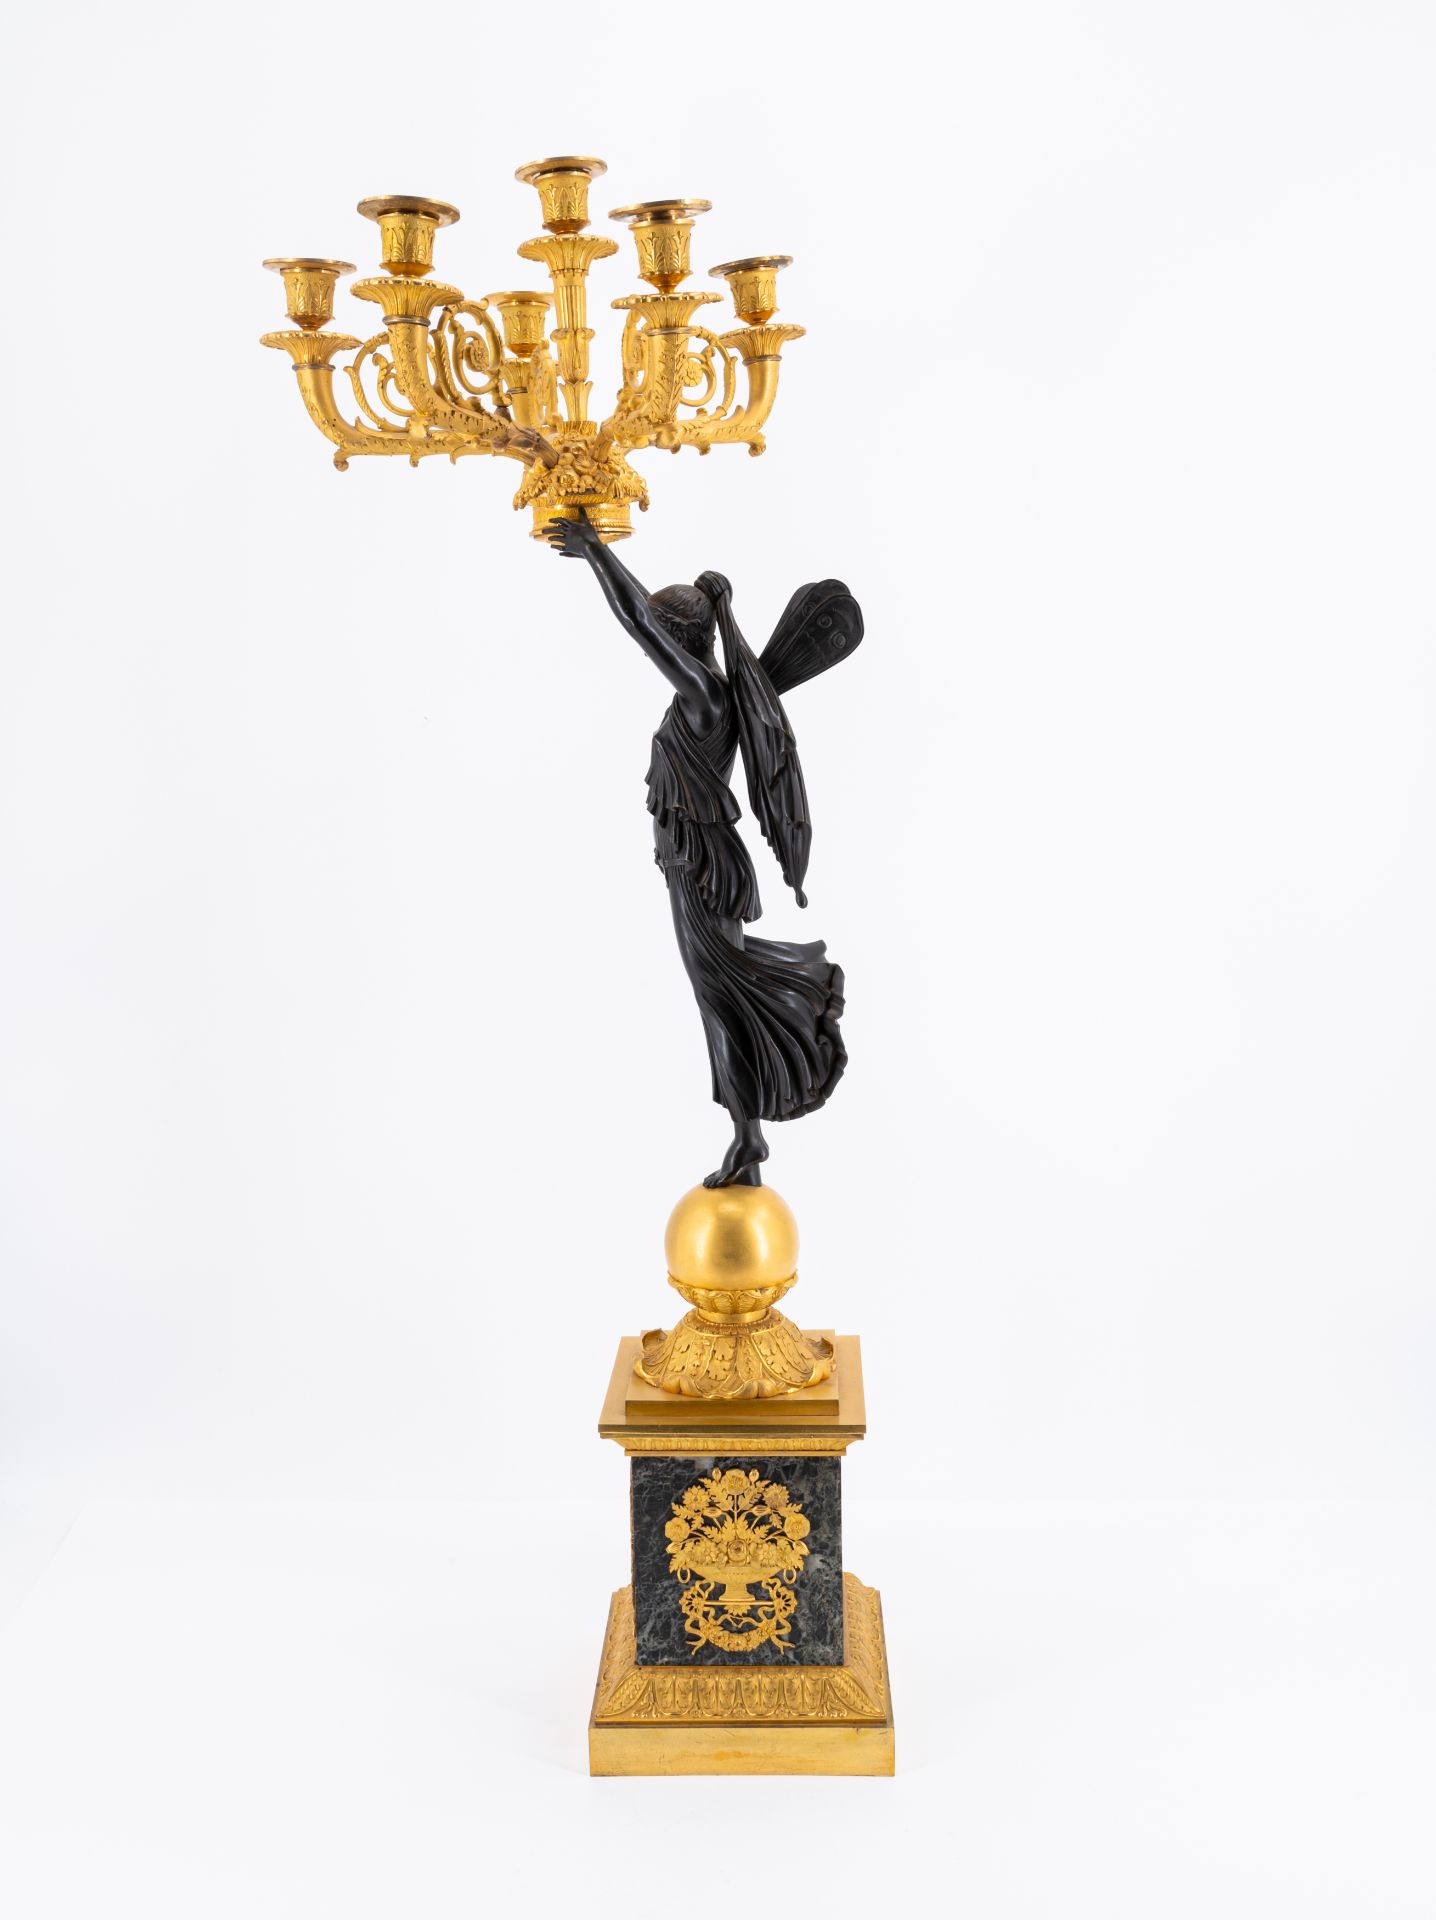 Pair of magnificent Empire candelabra with psyches - Image 4 of 7